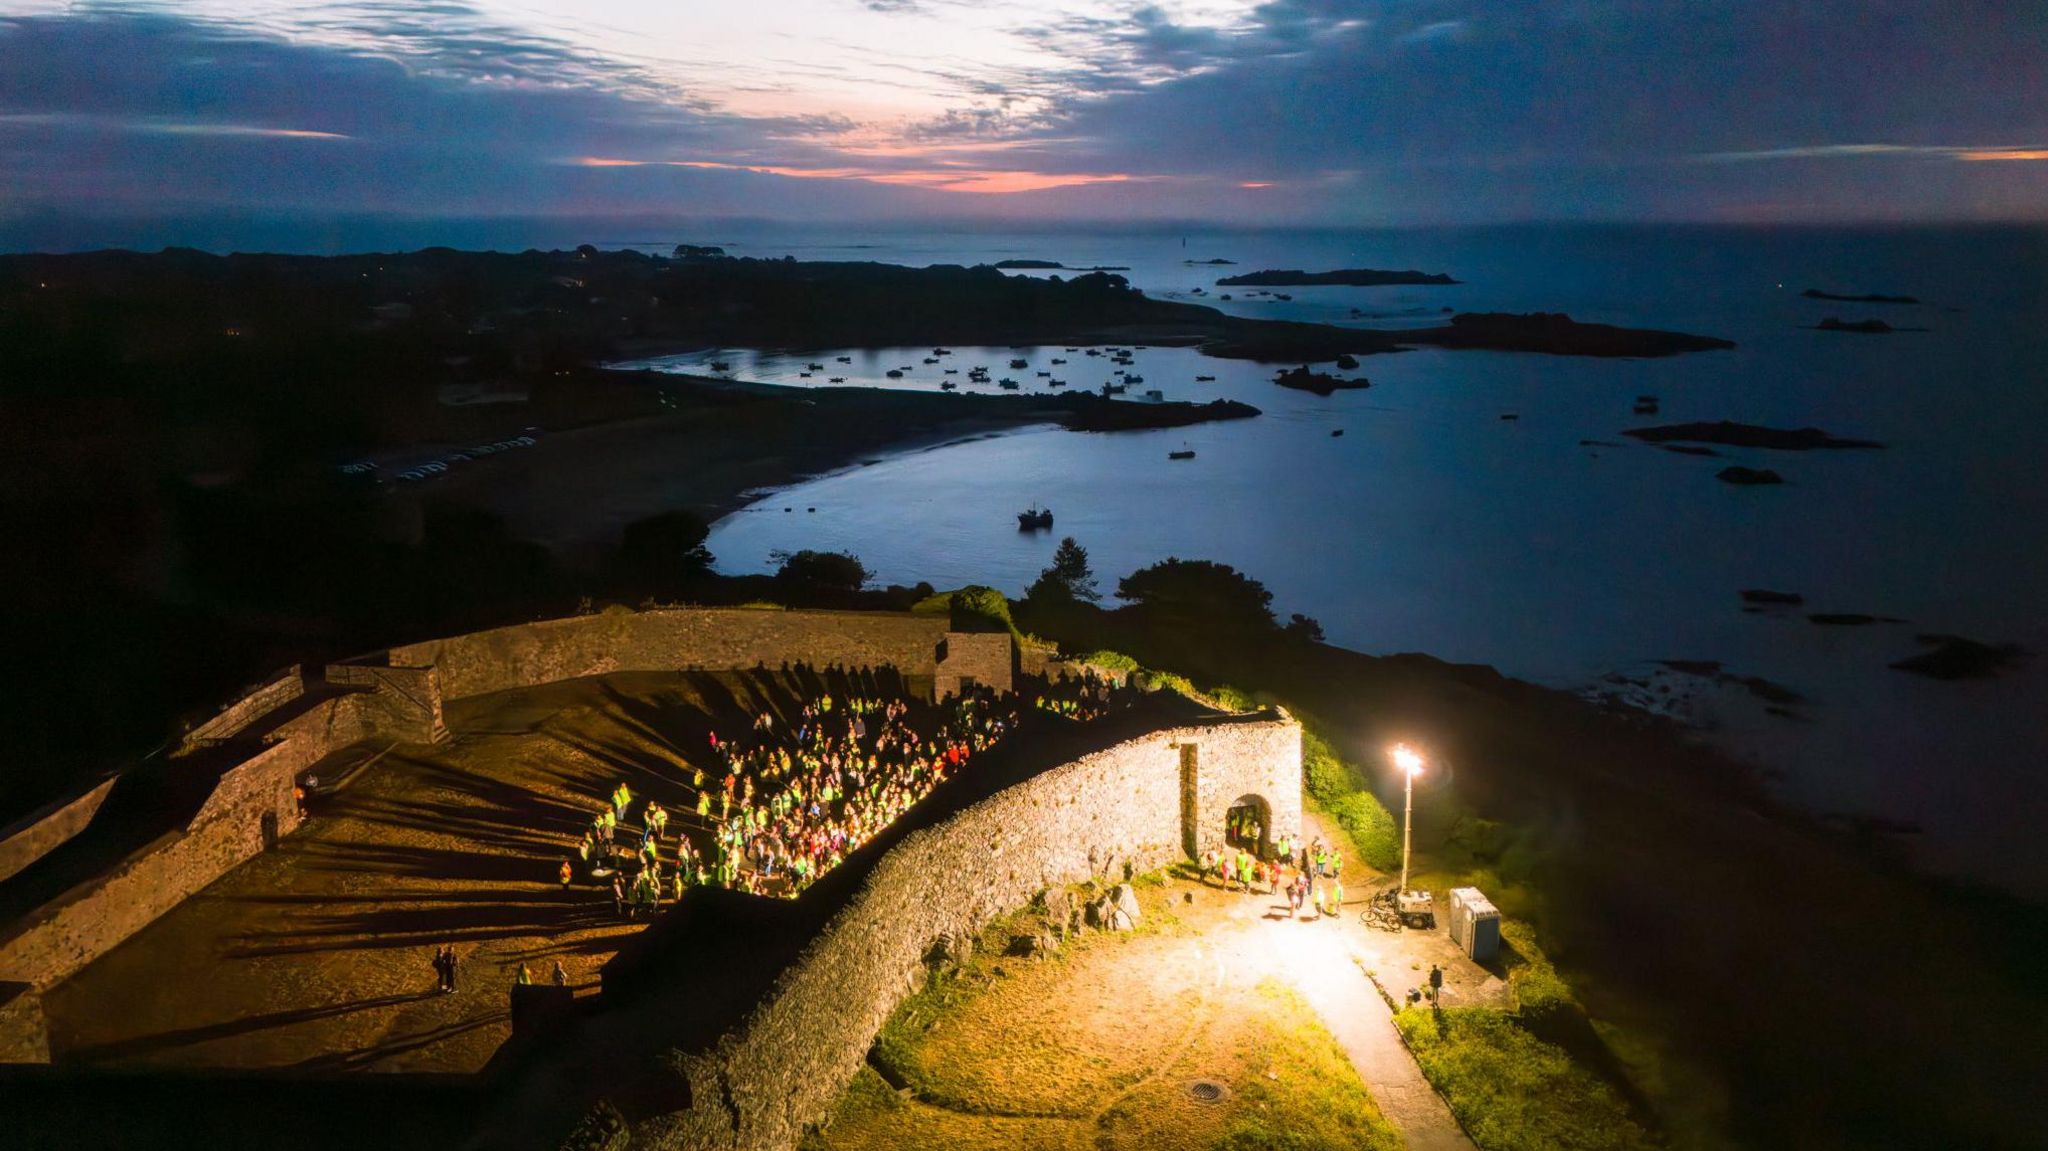 A drone photo showing people gathering at sunrise at Vale Castle